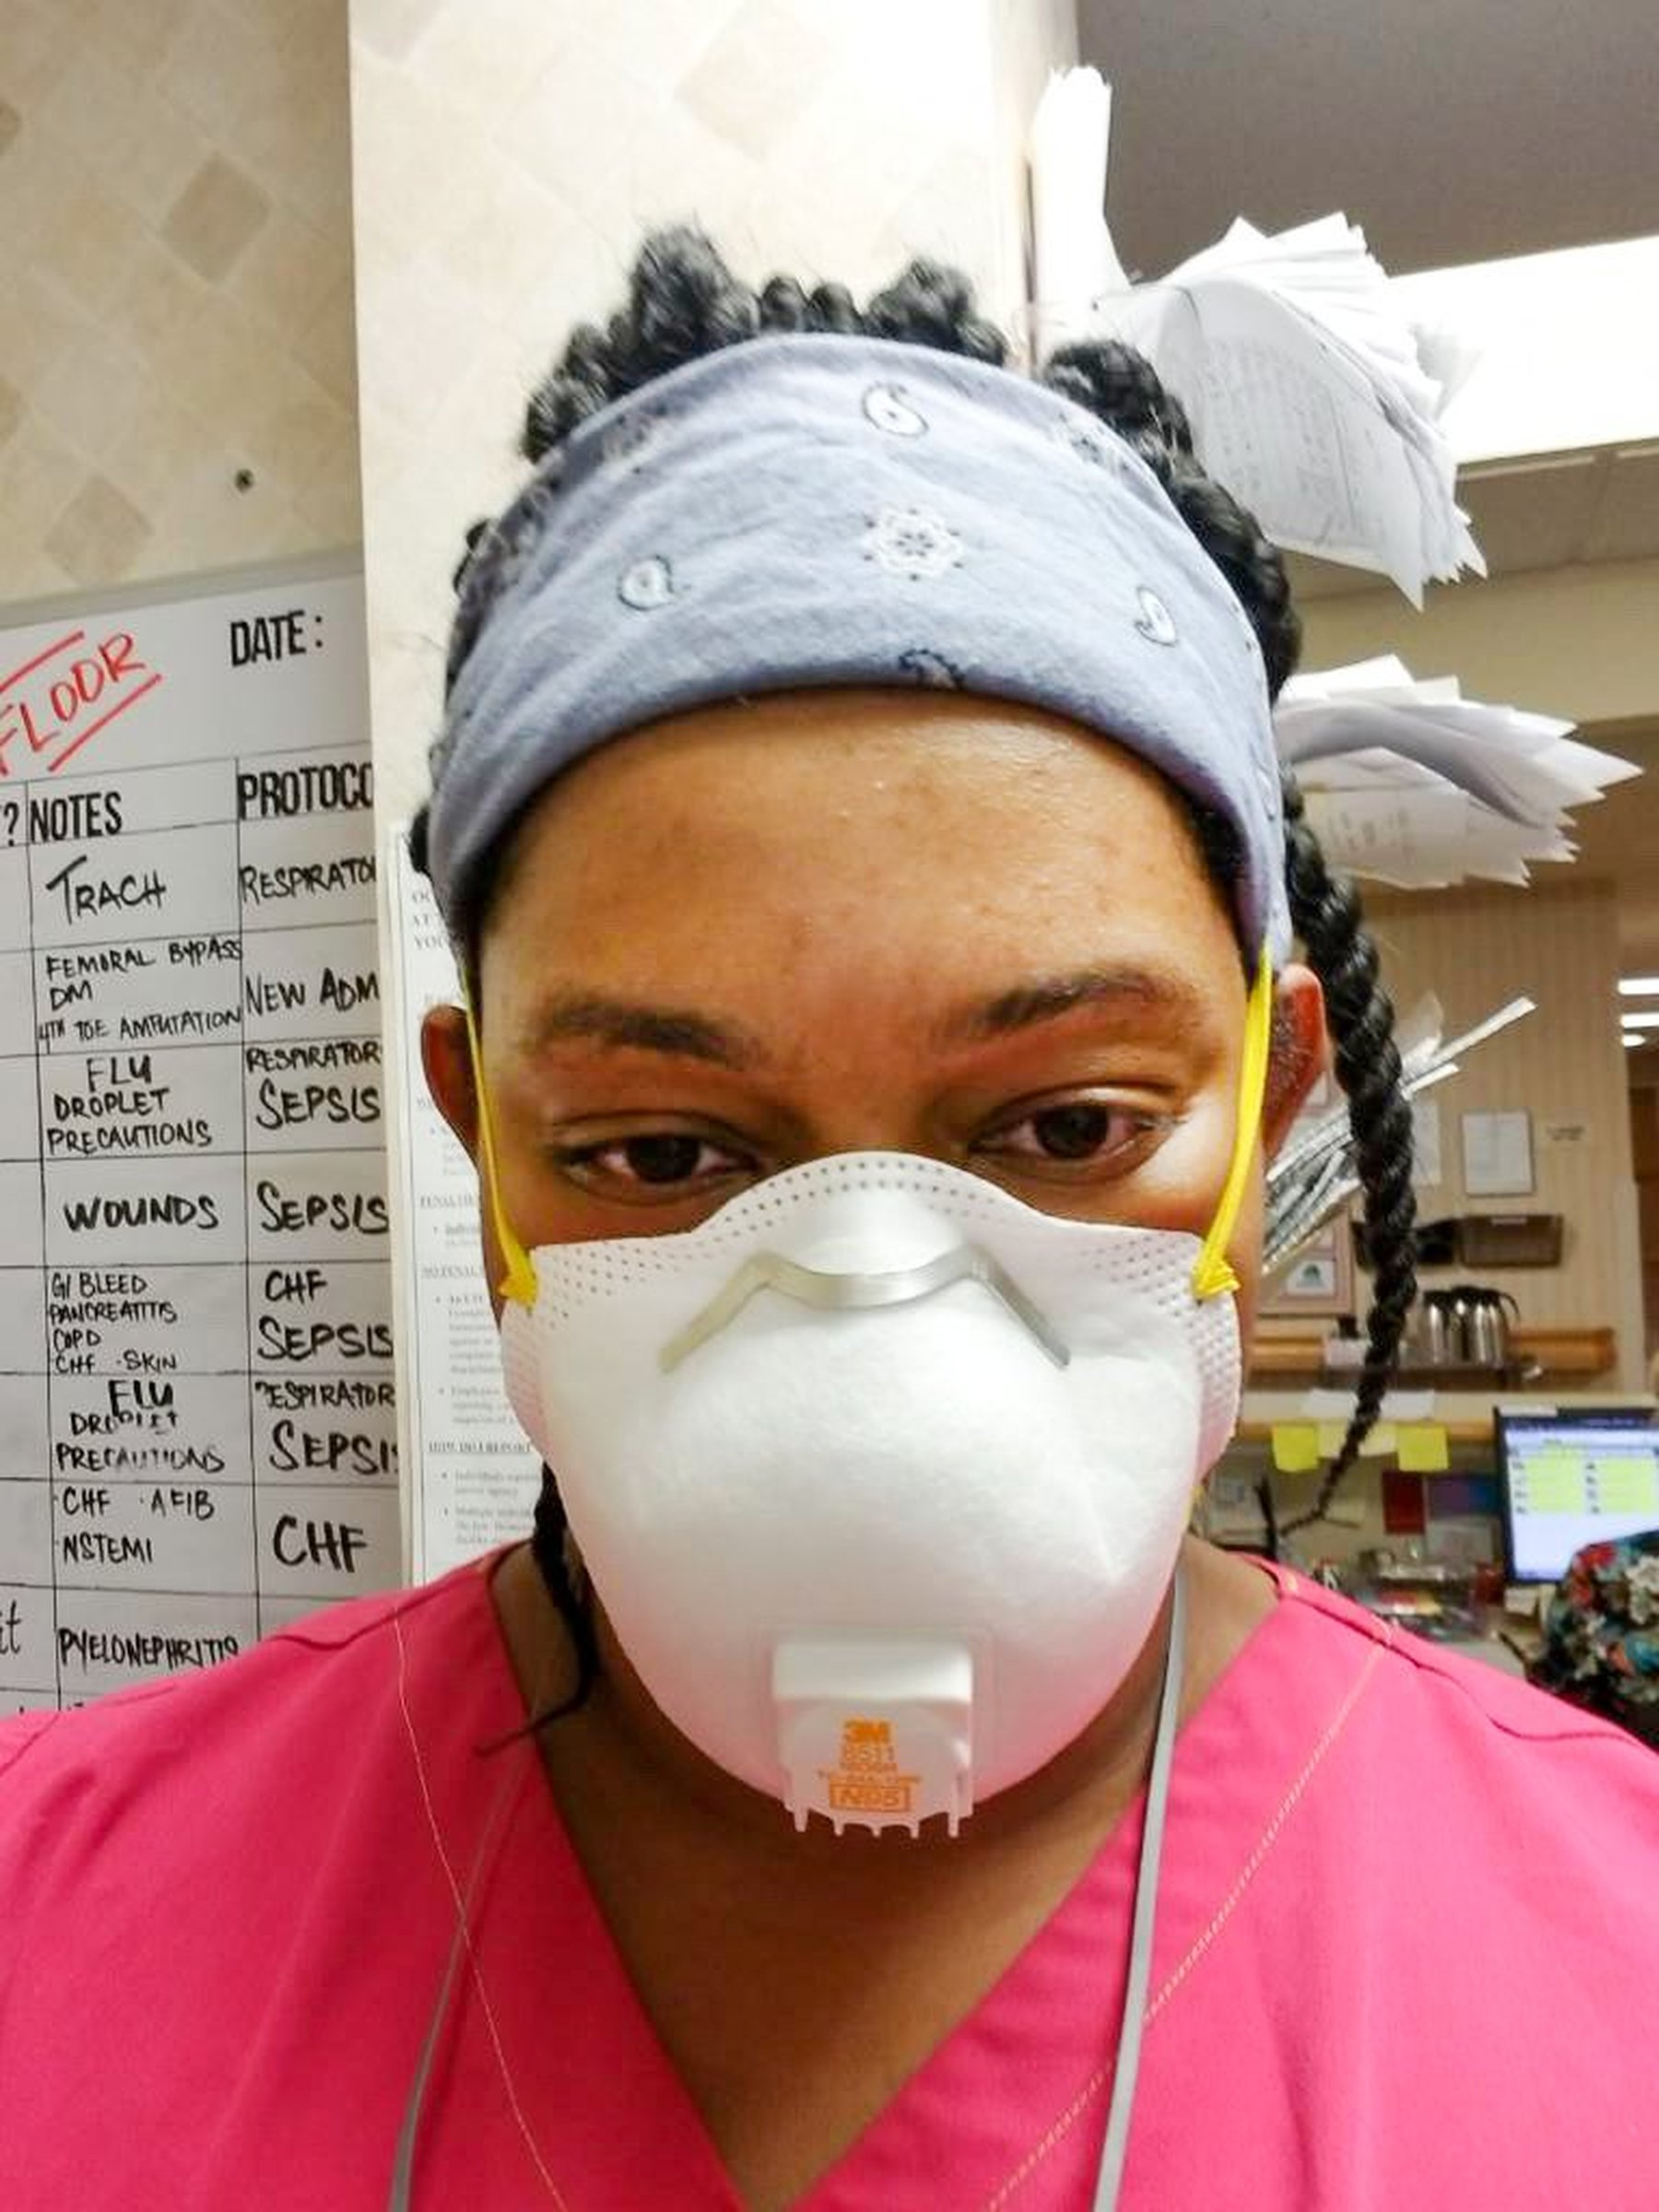 Shelly Hughes Caregiver in N95 mask at work